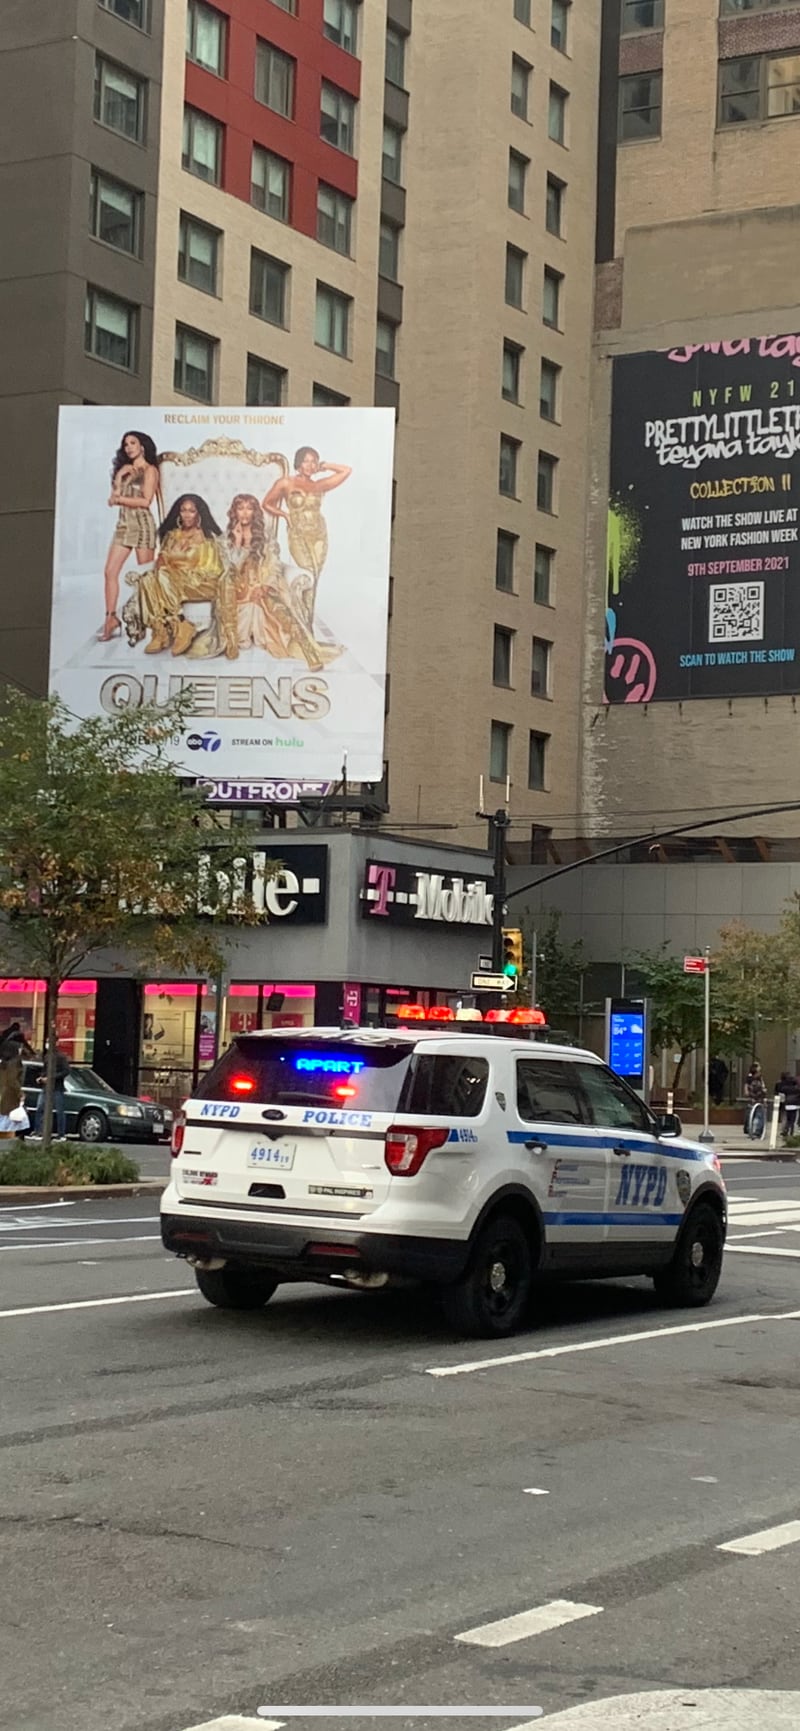 ABC put up billboards in Atlanta for "Queens." While in New York, I also caught a "Queens" billboard not far from Times Square on Nov. 7, 2021. RODNEY HO/rho@ajc.com